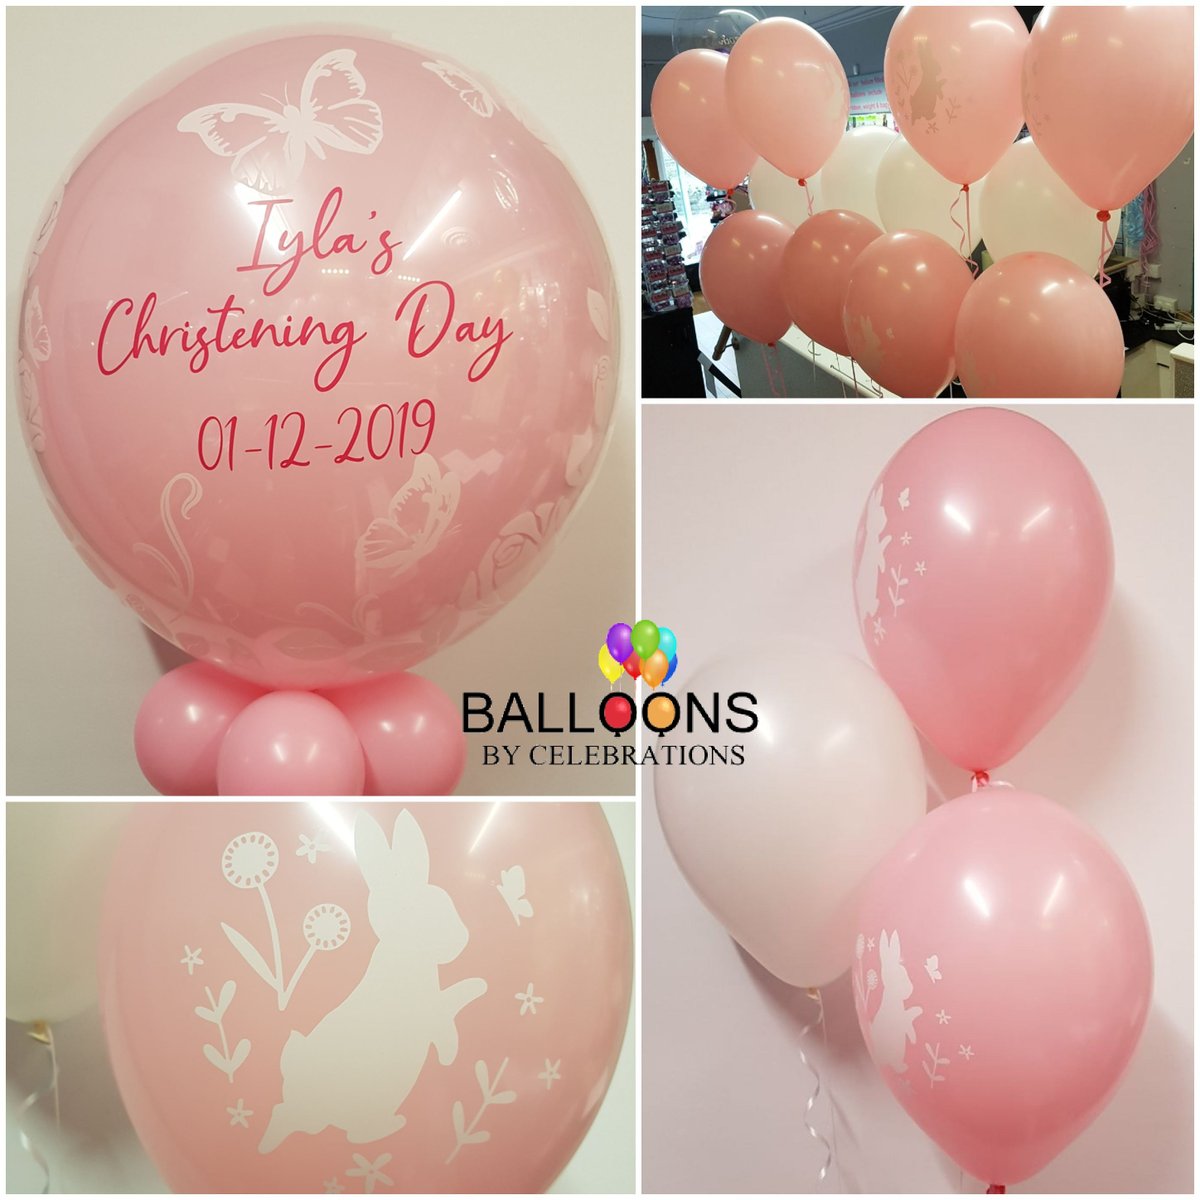 Here's some of last weeks Christening balloons we made for Iyla's big day including this beautiful 24' personalised bubble balloon.

#christeningideas #buxtonballoons #balloonsbuxton #buxtonpartyshop #partyshopbuxton  #celebrationsbuxton #balloonsbycelebrations